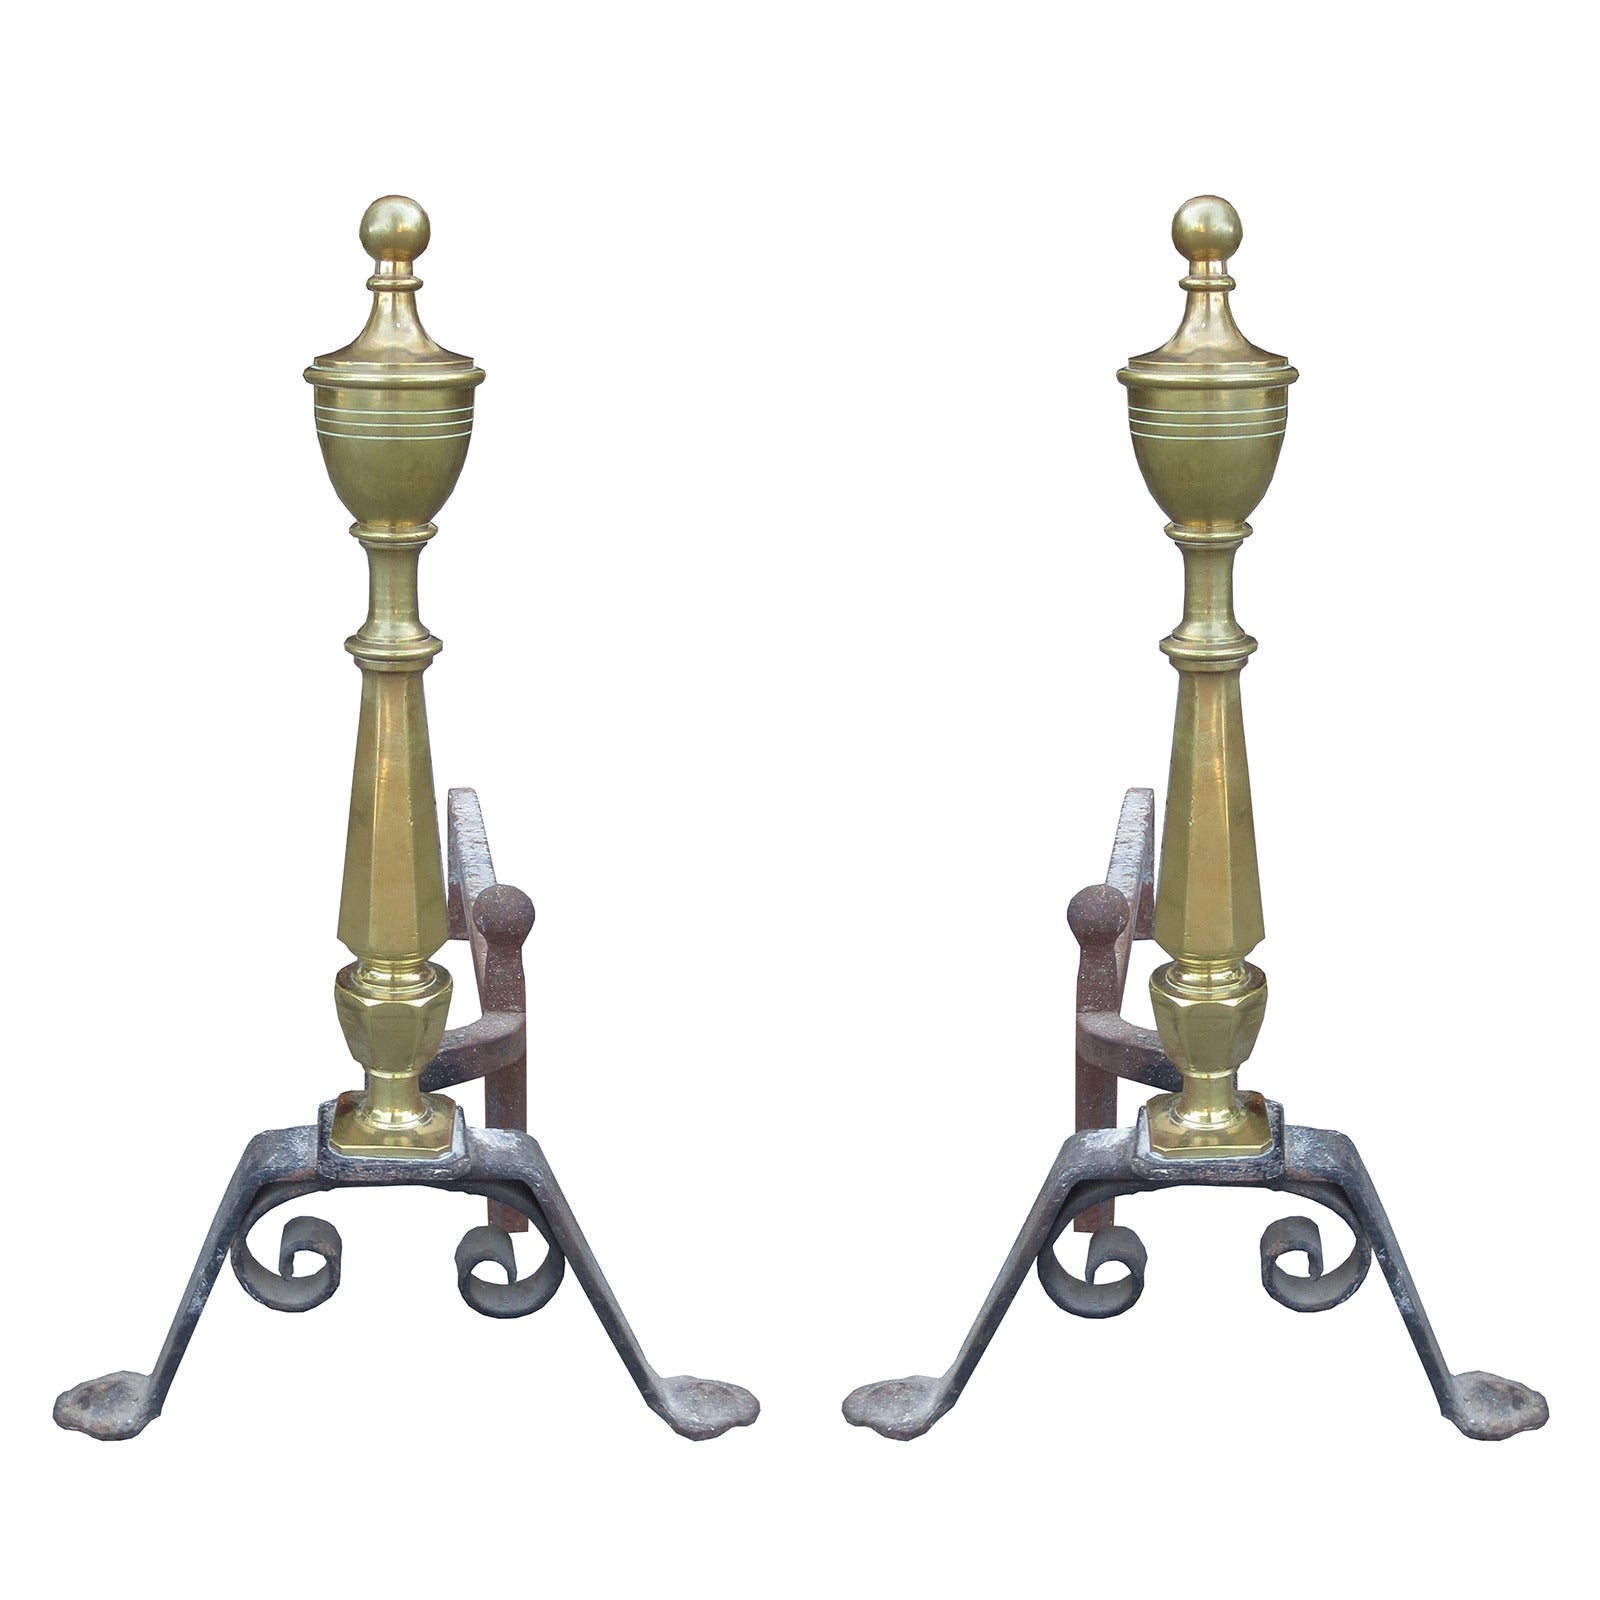 Late 19th Century or Early 20th Century Brass and Iron Andirons